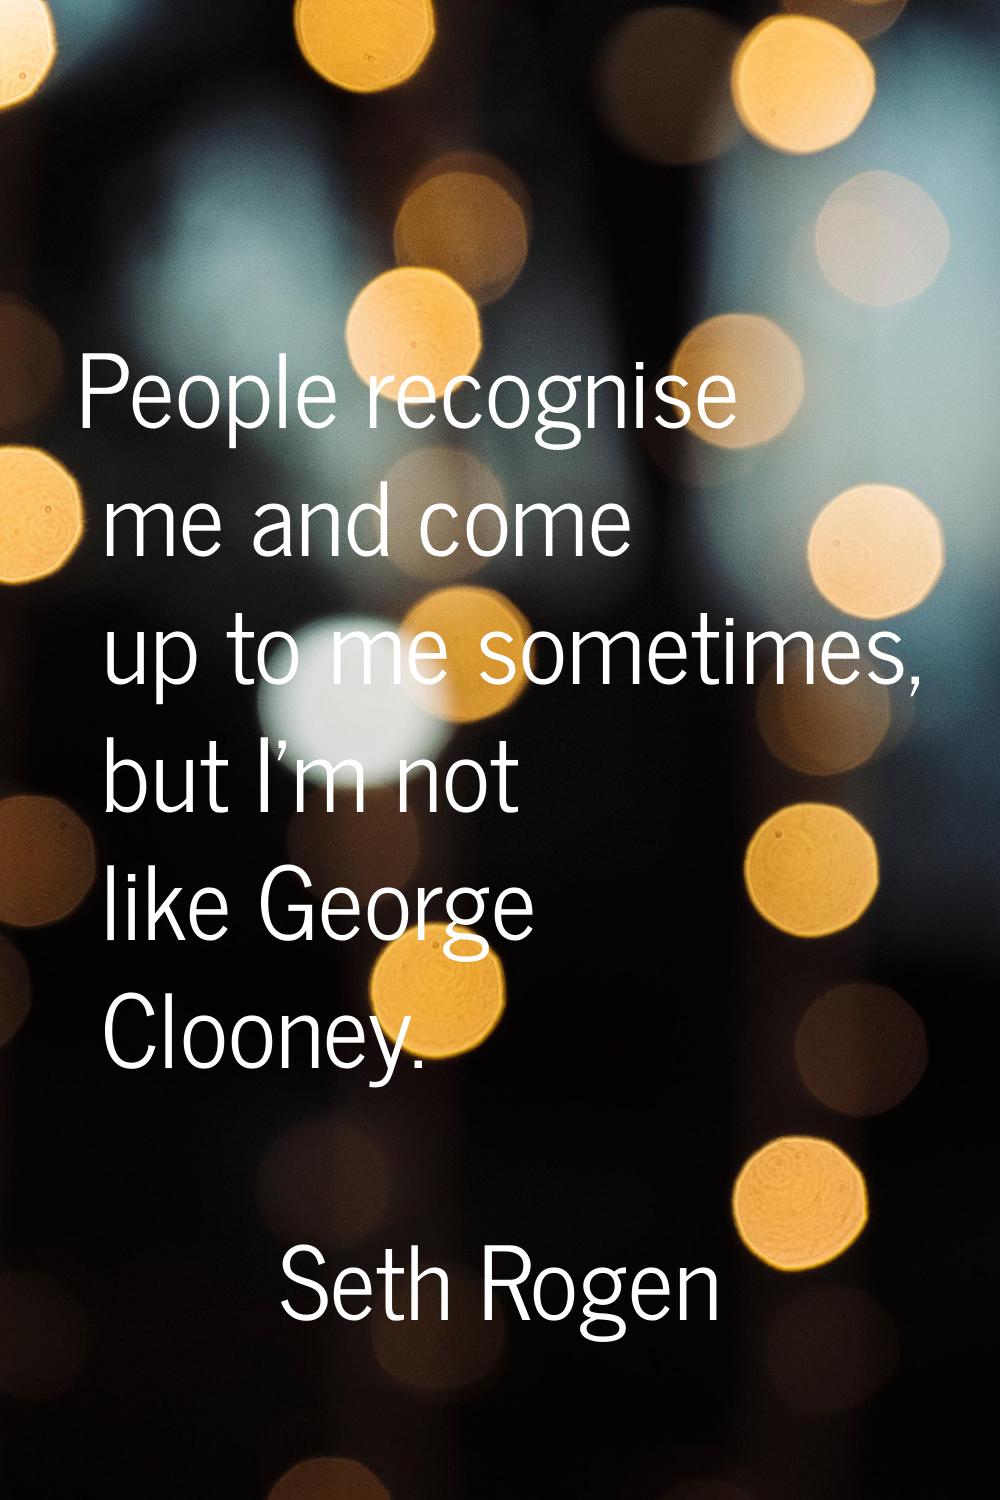 People recognise me and come up to me sometimes, but I'm not like George Clooney.